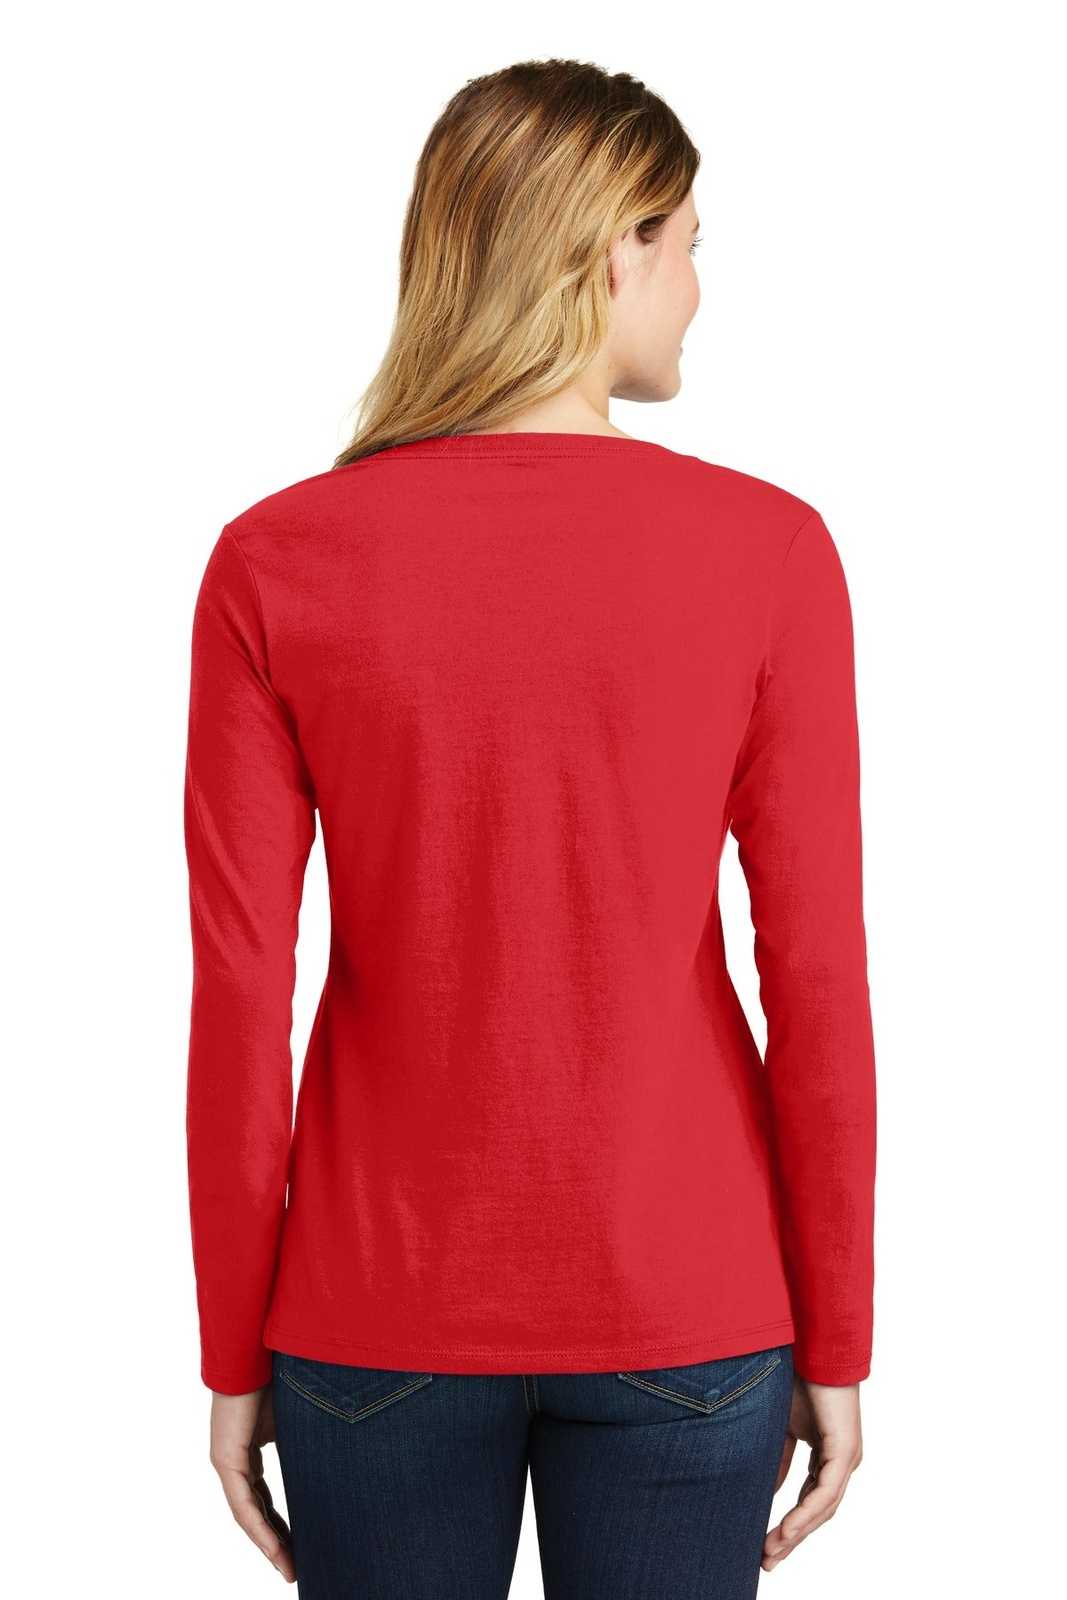 Port & Company LPC450VLS Ladies Long Sleeve Fan Favorite V-Neck Tee - Bright Red - HIT a Double - 1